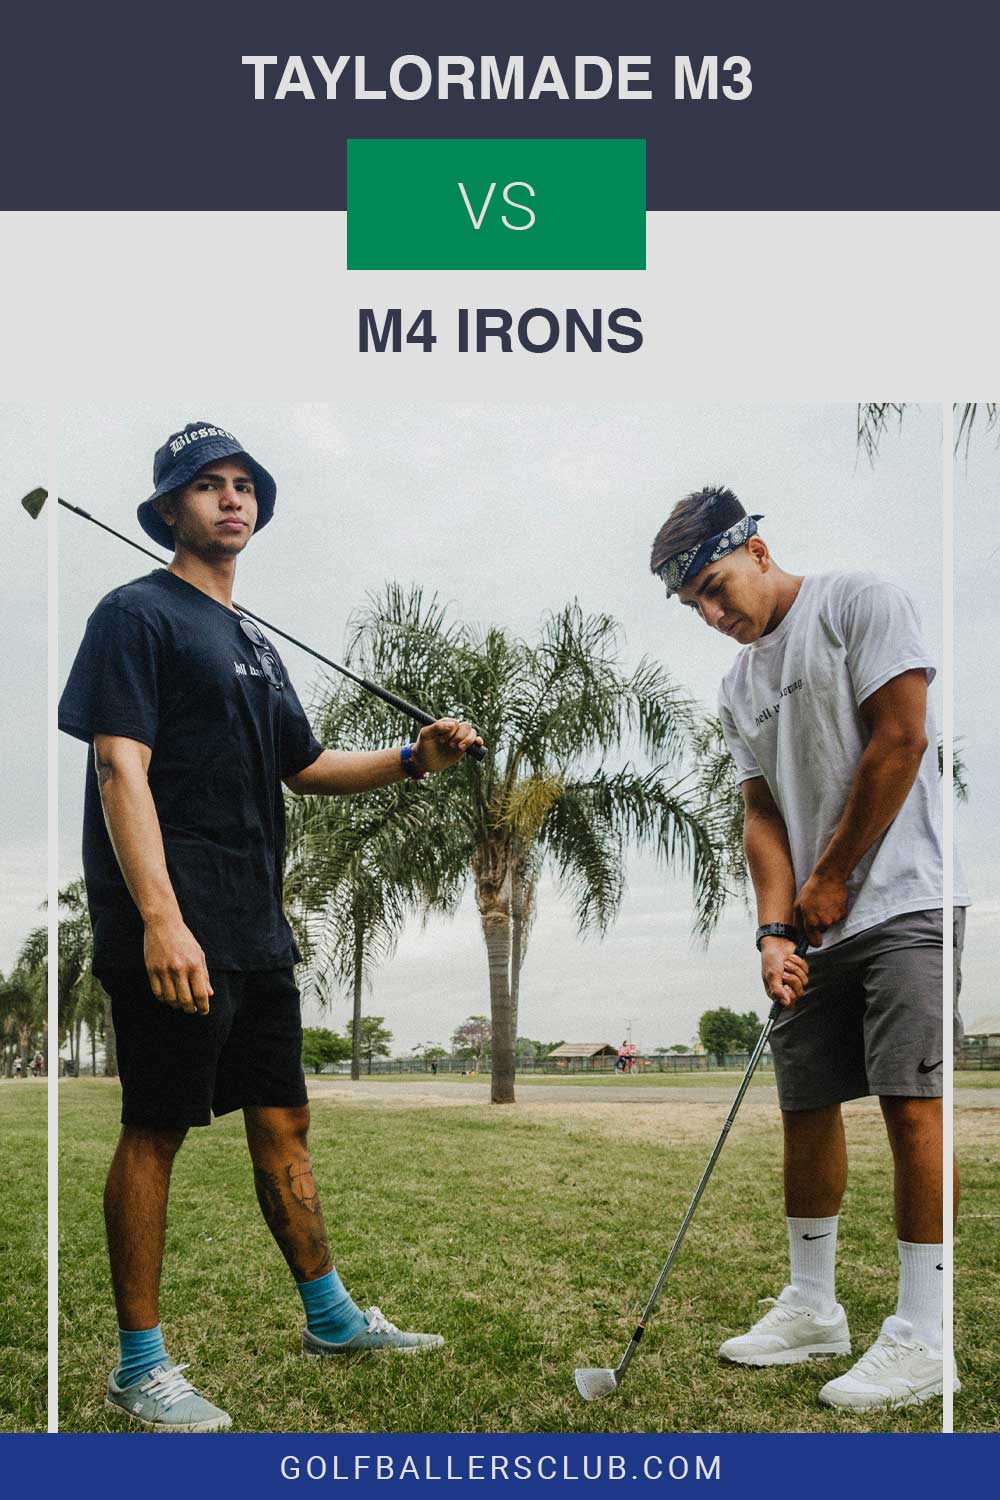 Two young gyus with their irons in a golf course - Difference between TaylorMade M3 vs. M4 Irons.